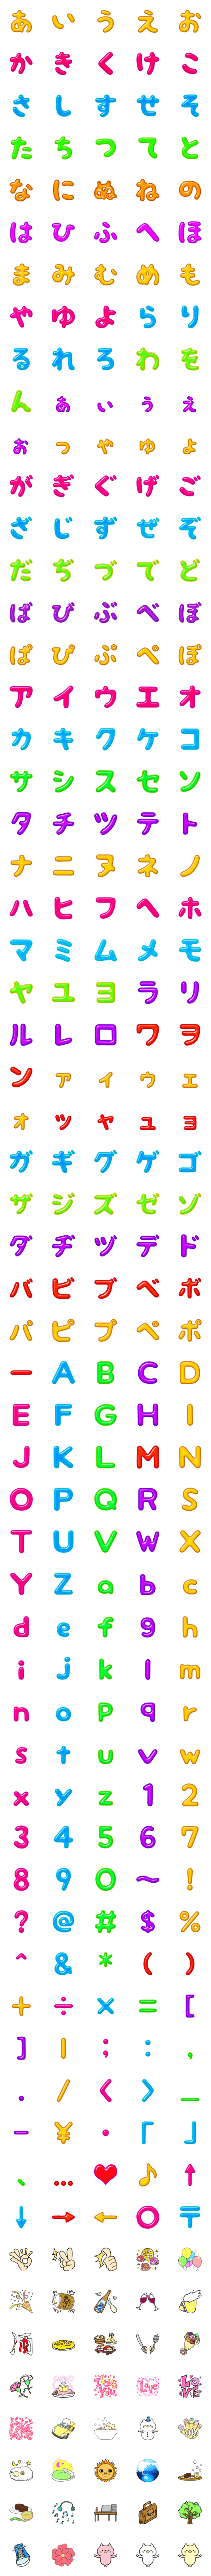 [LINE絵文字]使える特殊絵文字 2の画像一覧